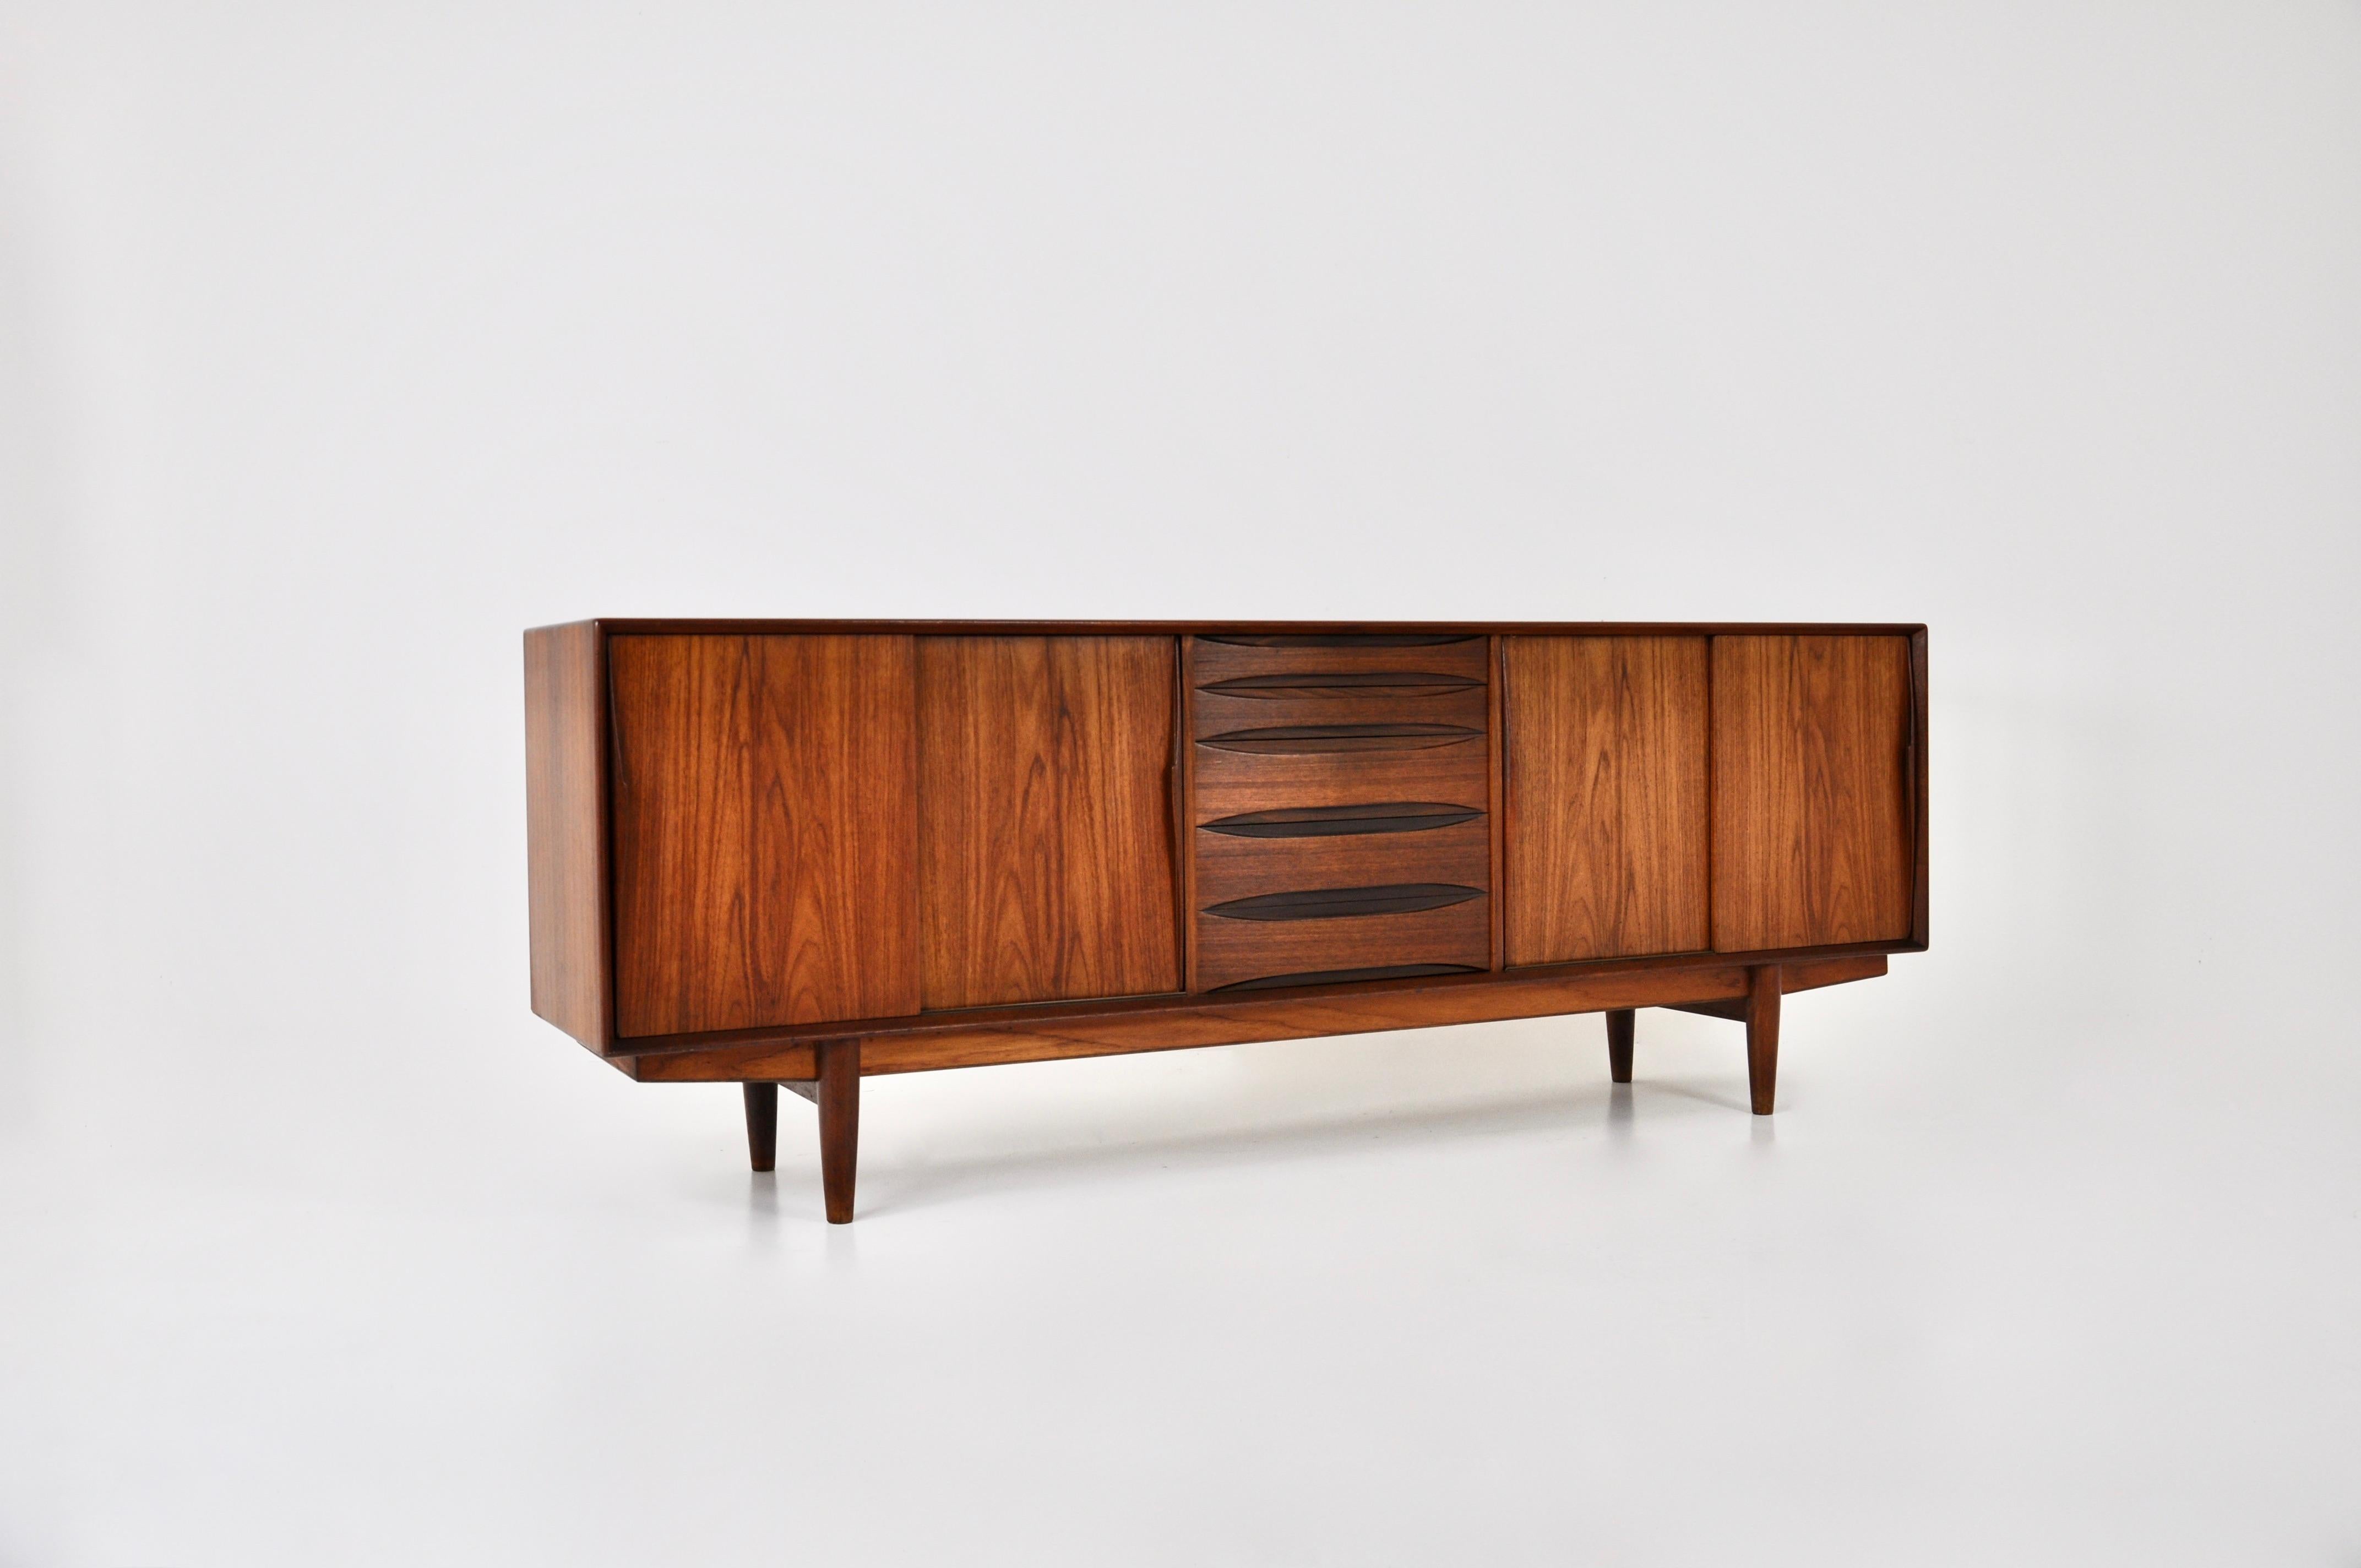 Danish sideboard in wood with 4 drawers and 4 sliding doors containing shelves. Stamped on the inside. Wear due to time and age.